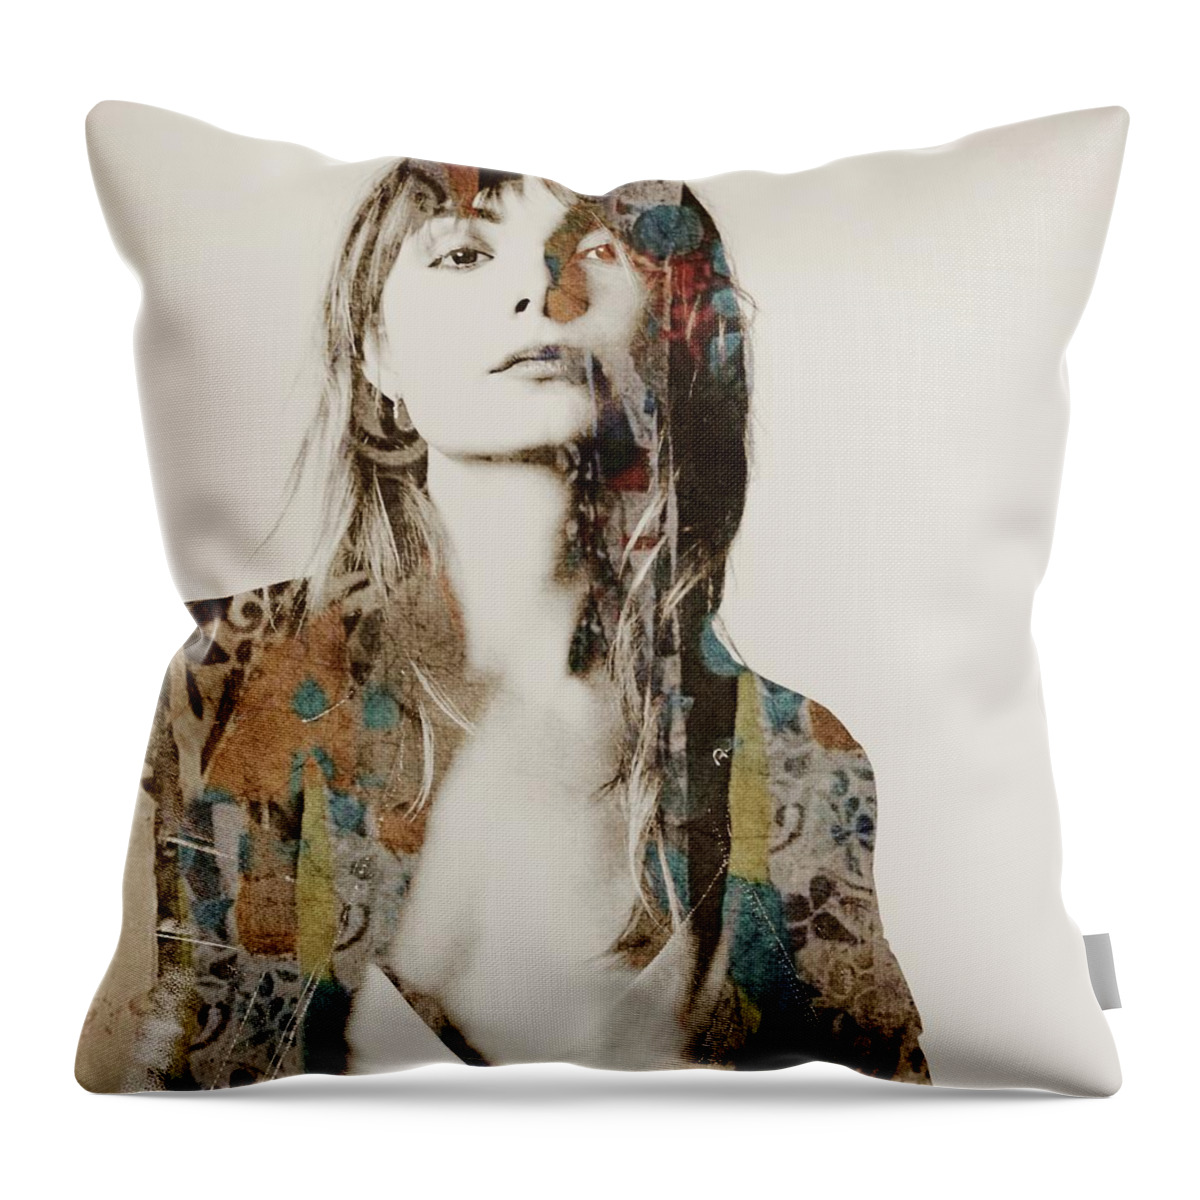 Sixties Throw Pillow featuring the mixed media Born To Be With You by Paul Lovering